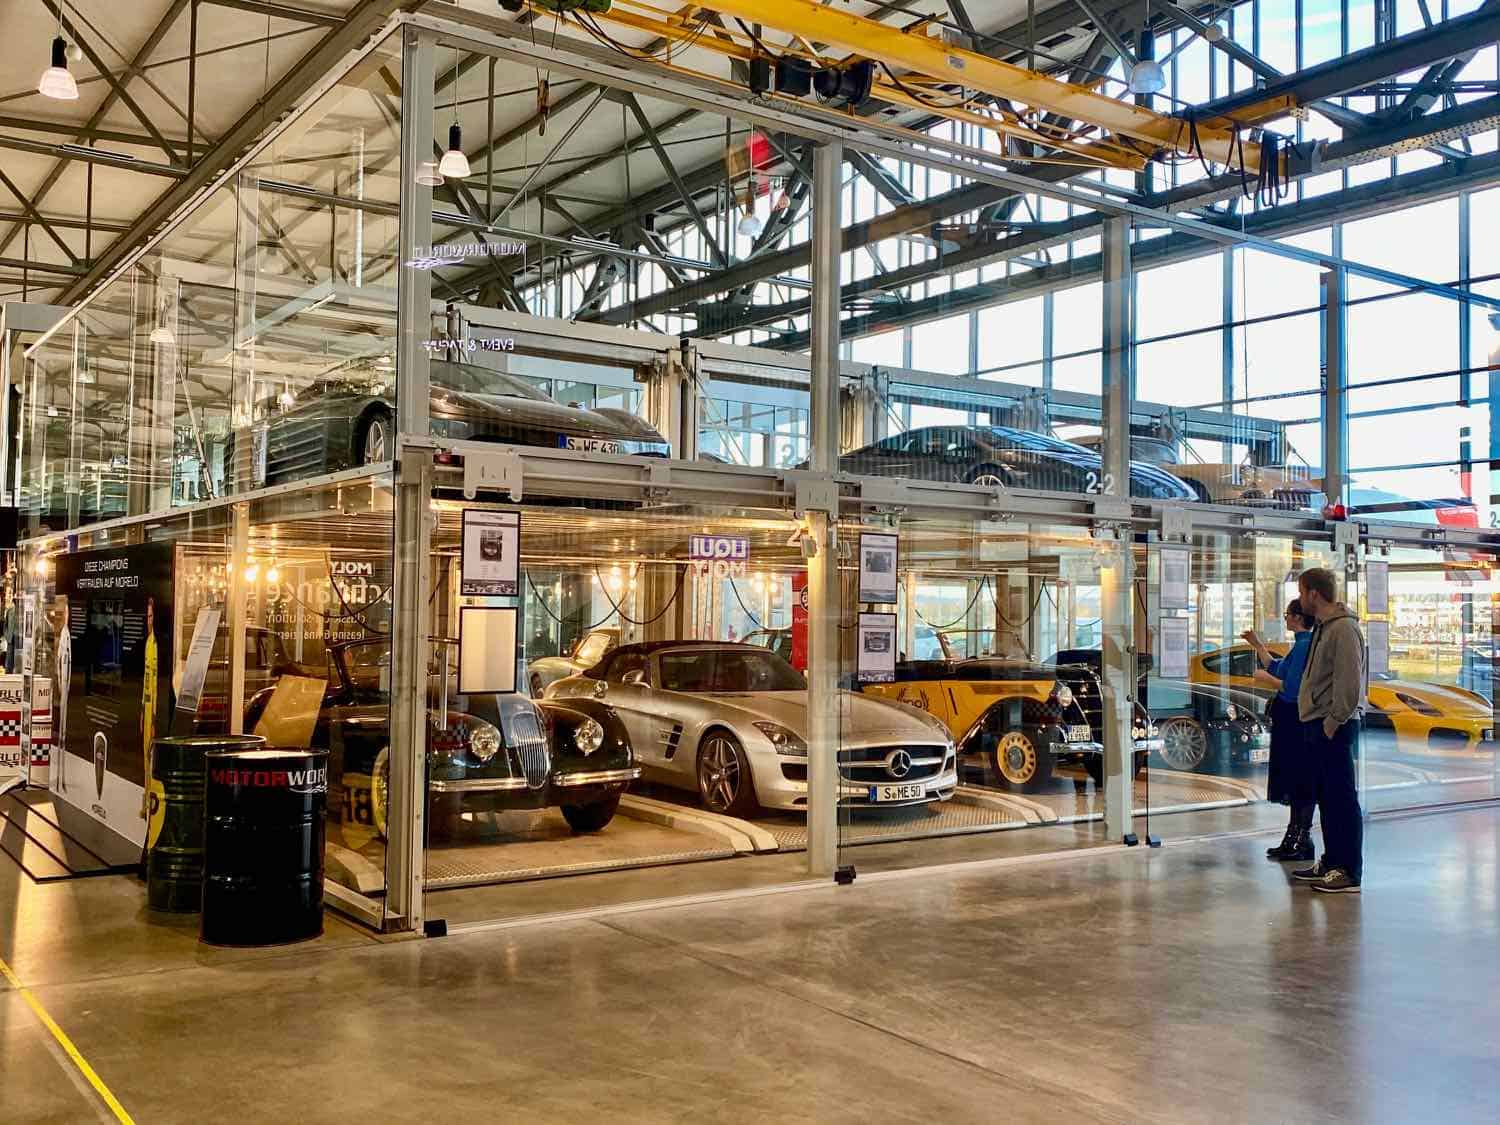 A car museum with cars housed in open bays protected by glass